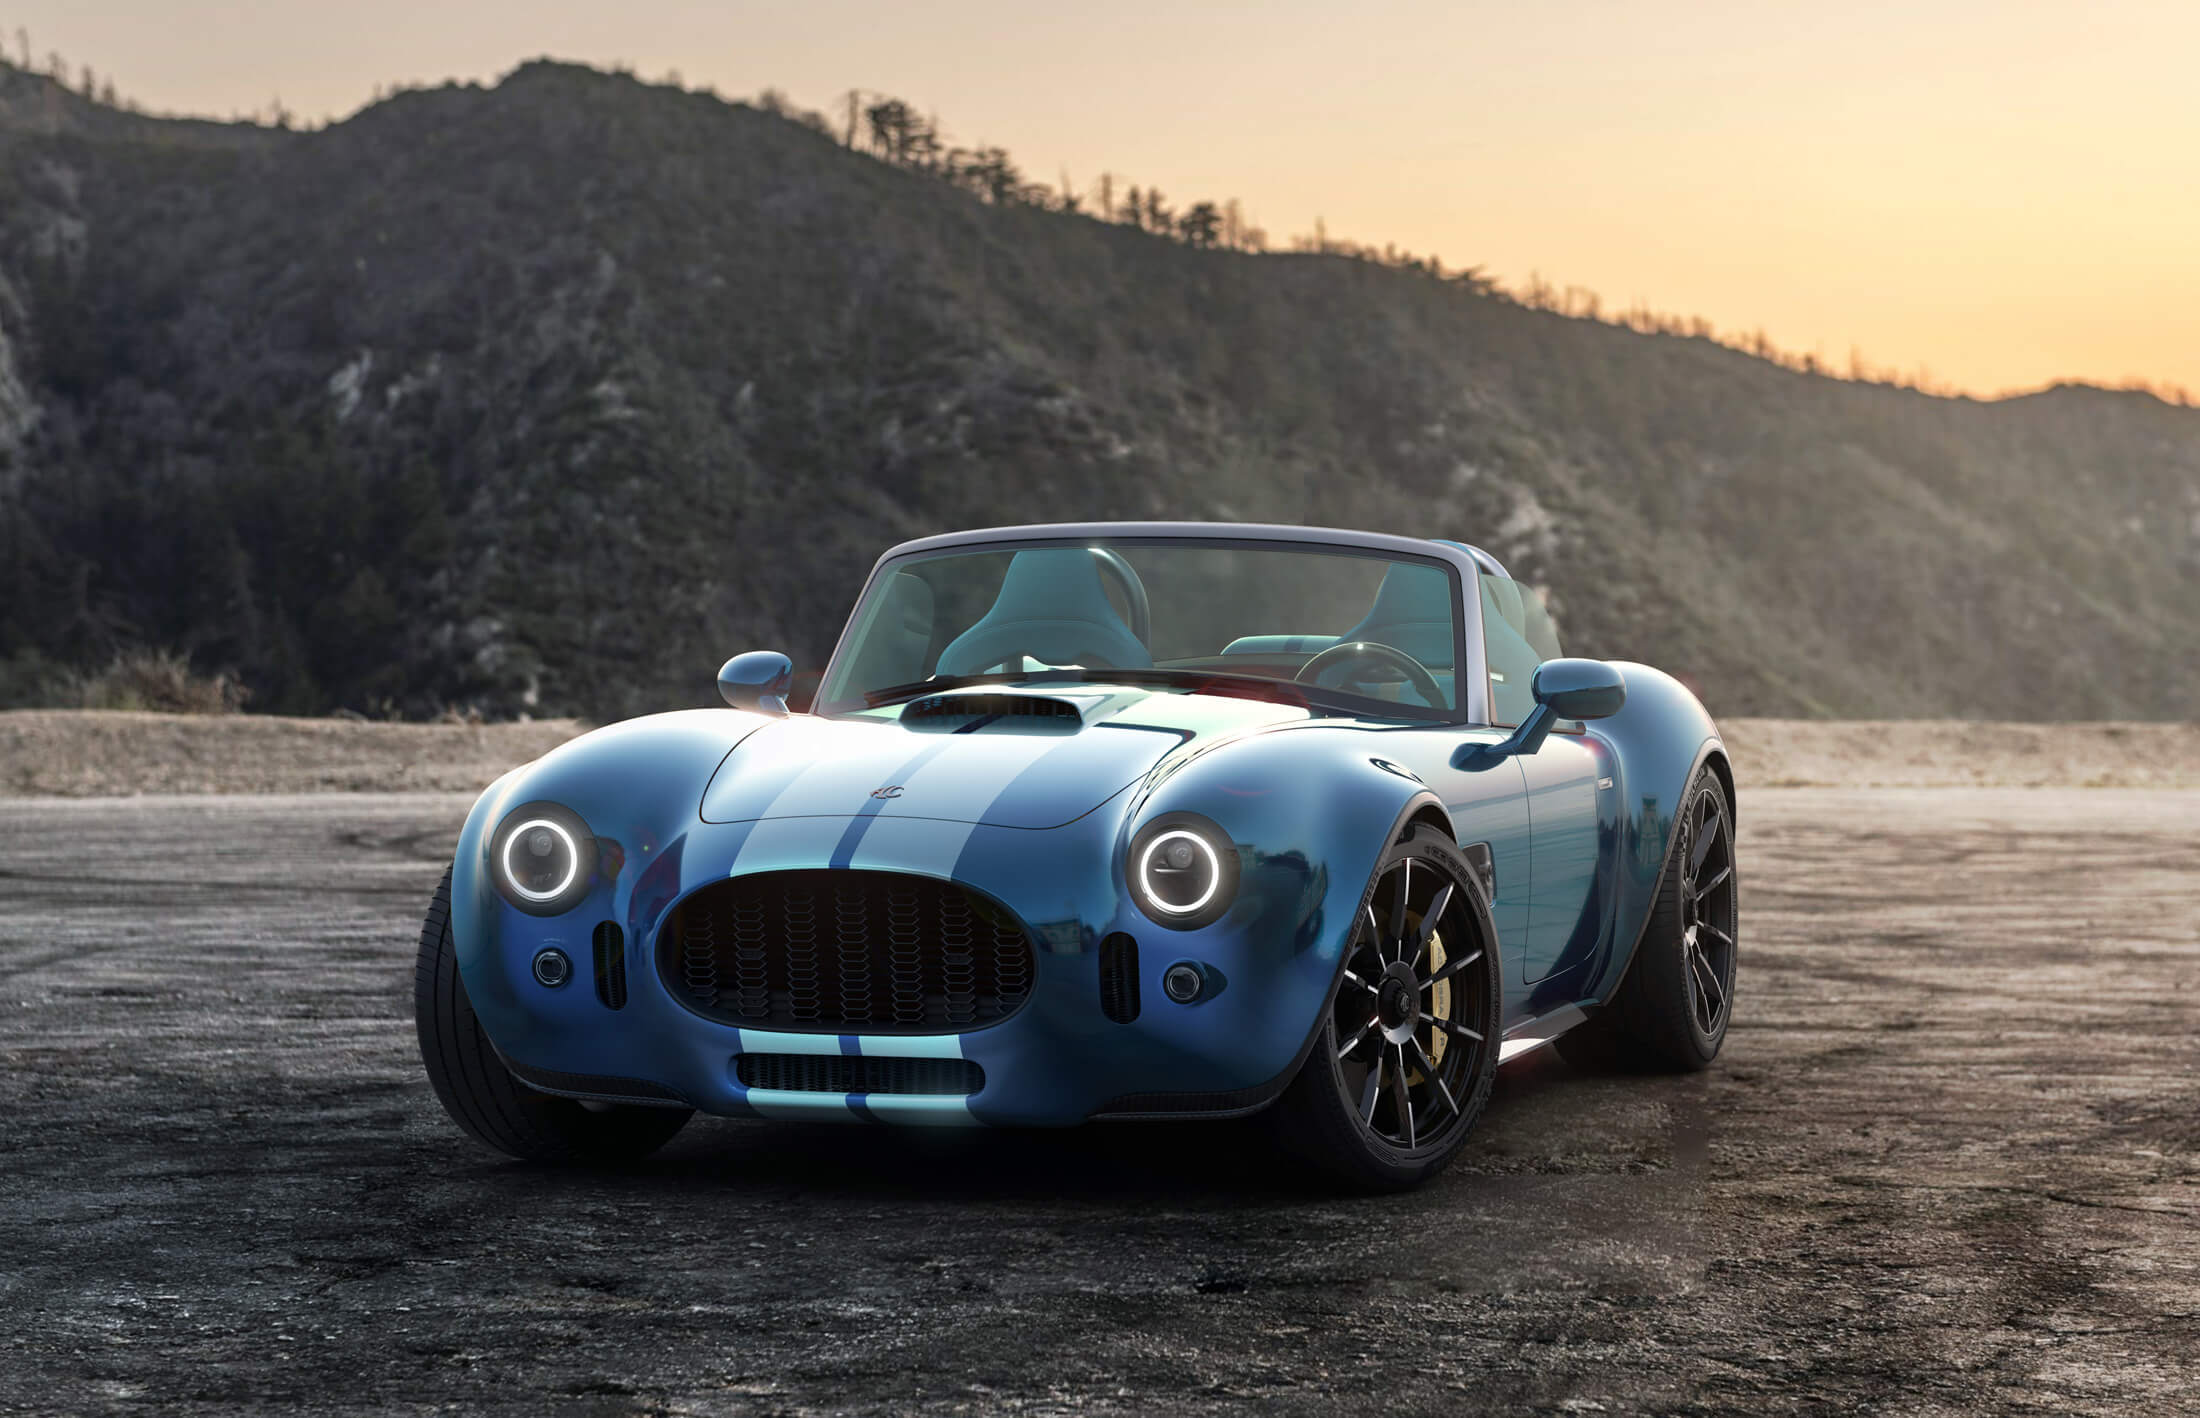 The Shelby Cobra reappears.